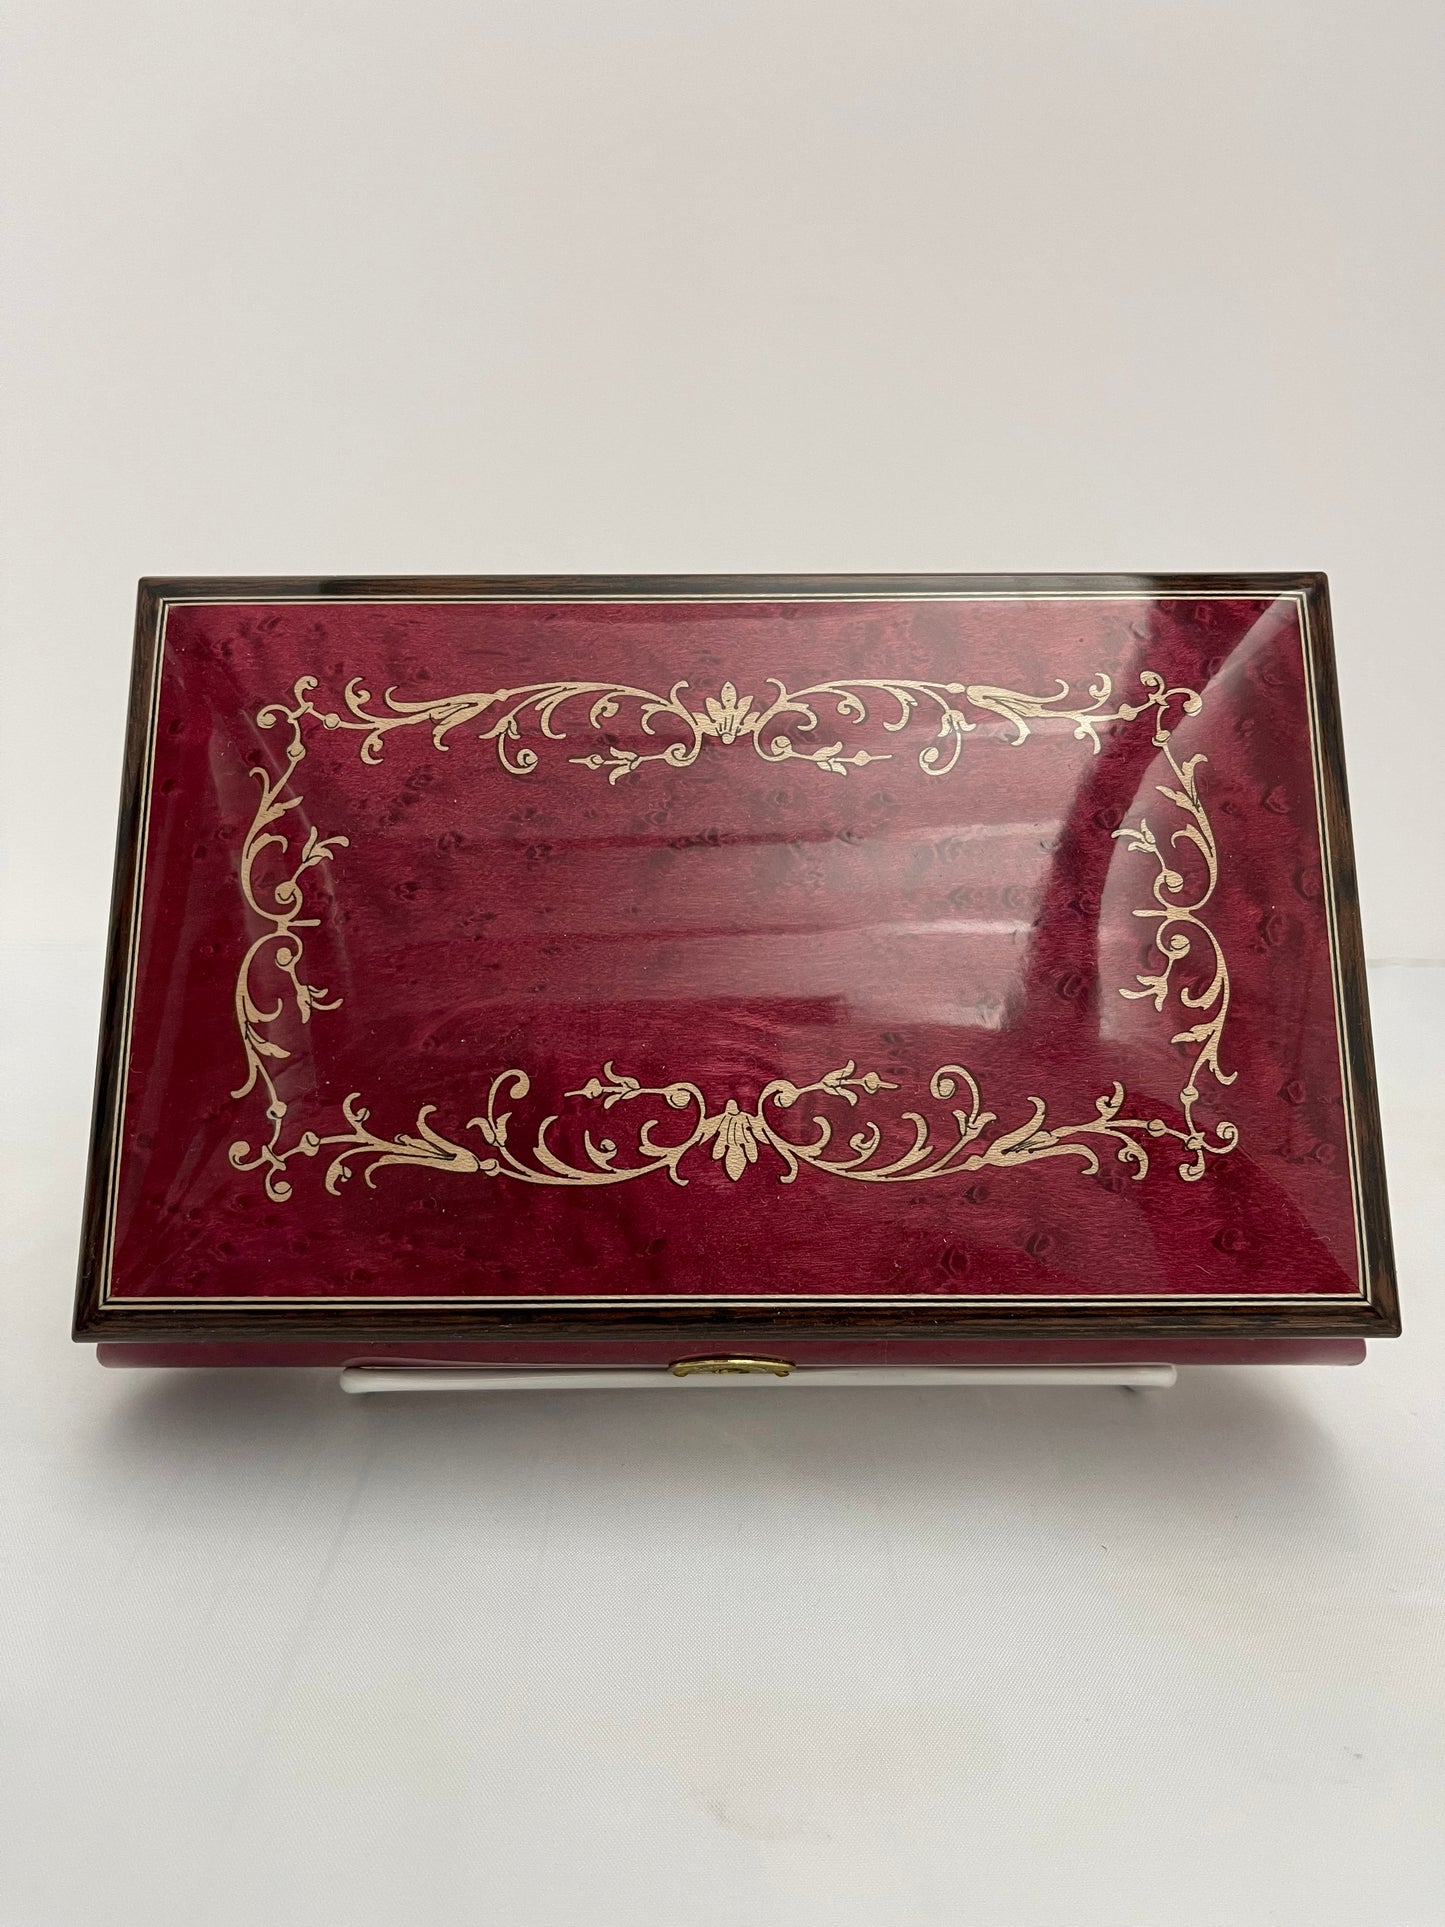 Inlaid Sorrento Italy Music Box Collectible Reuge "Minuet by Mozart" Tune